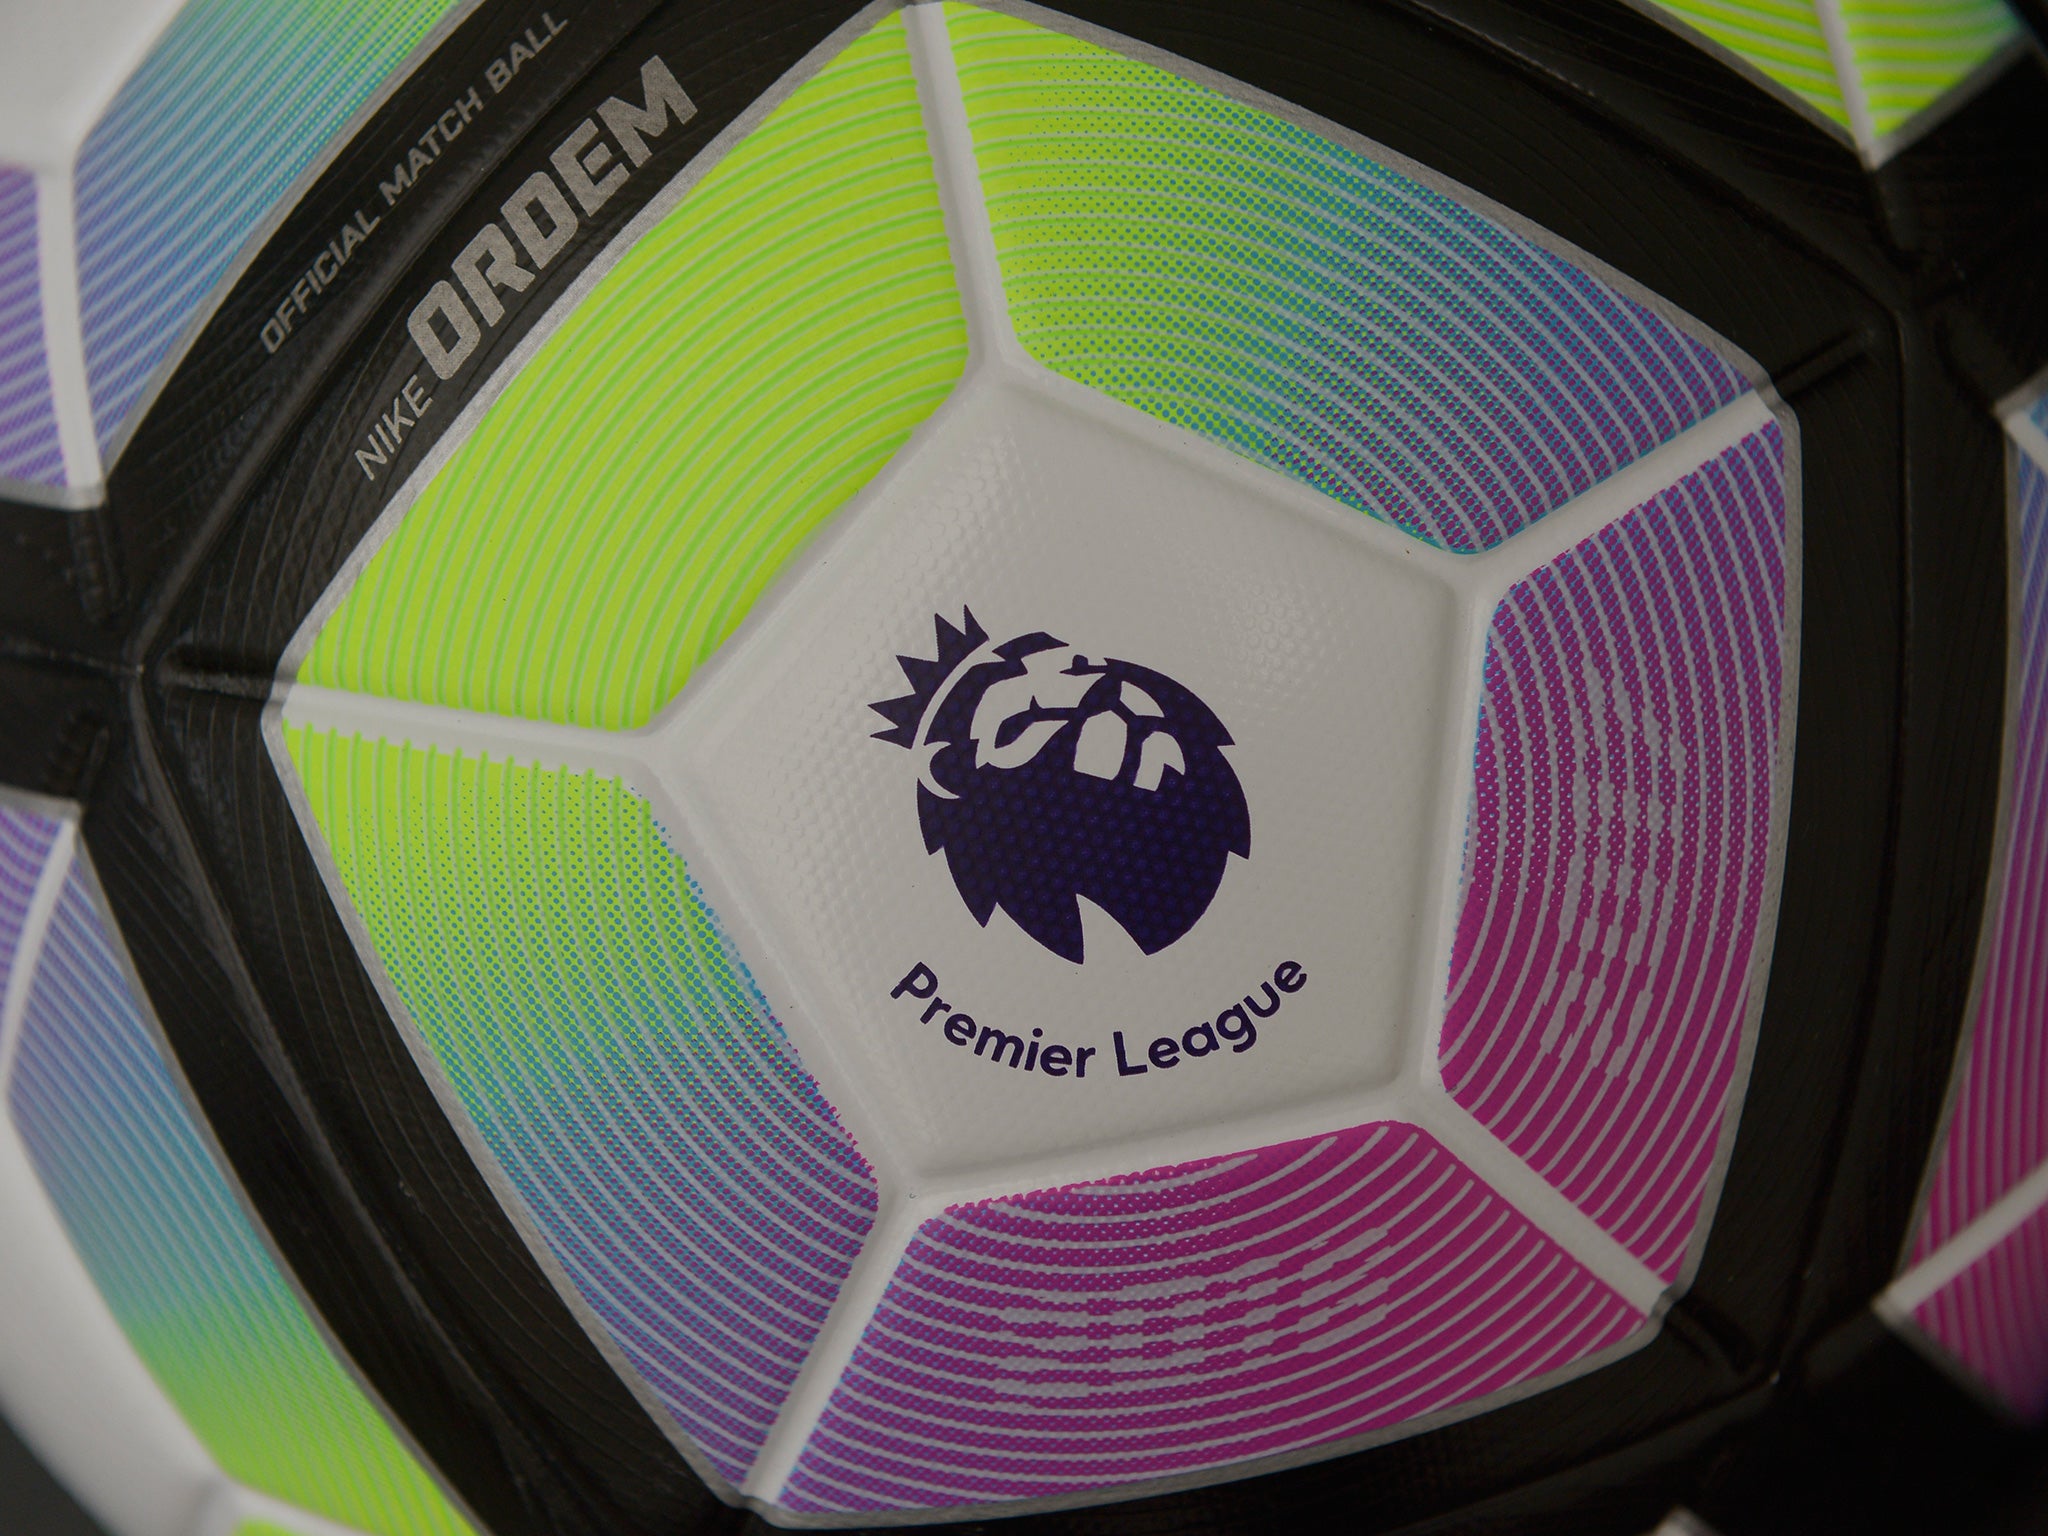 Nike's Ordem 4 will be the official ball of the 2016/17 Premier League season